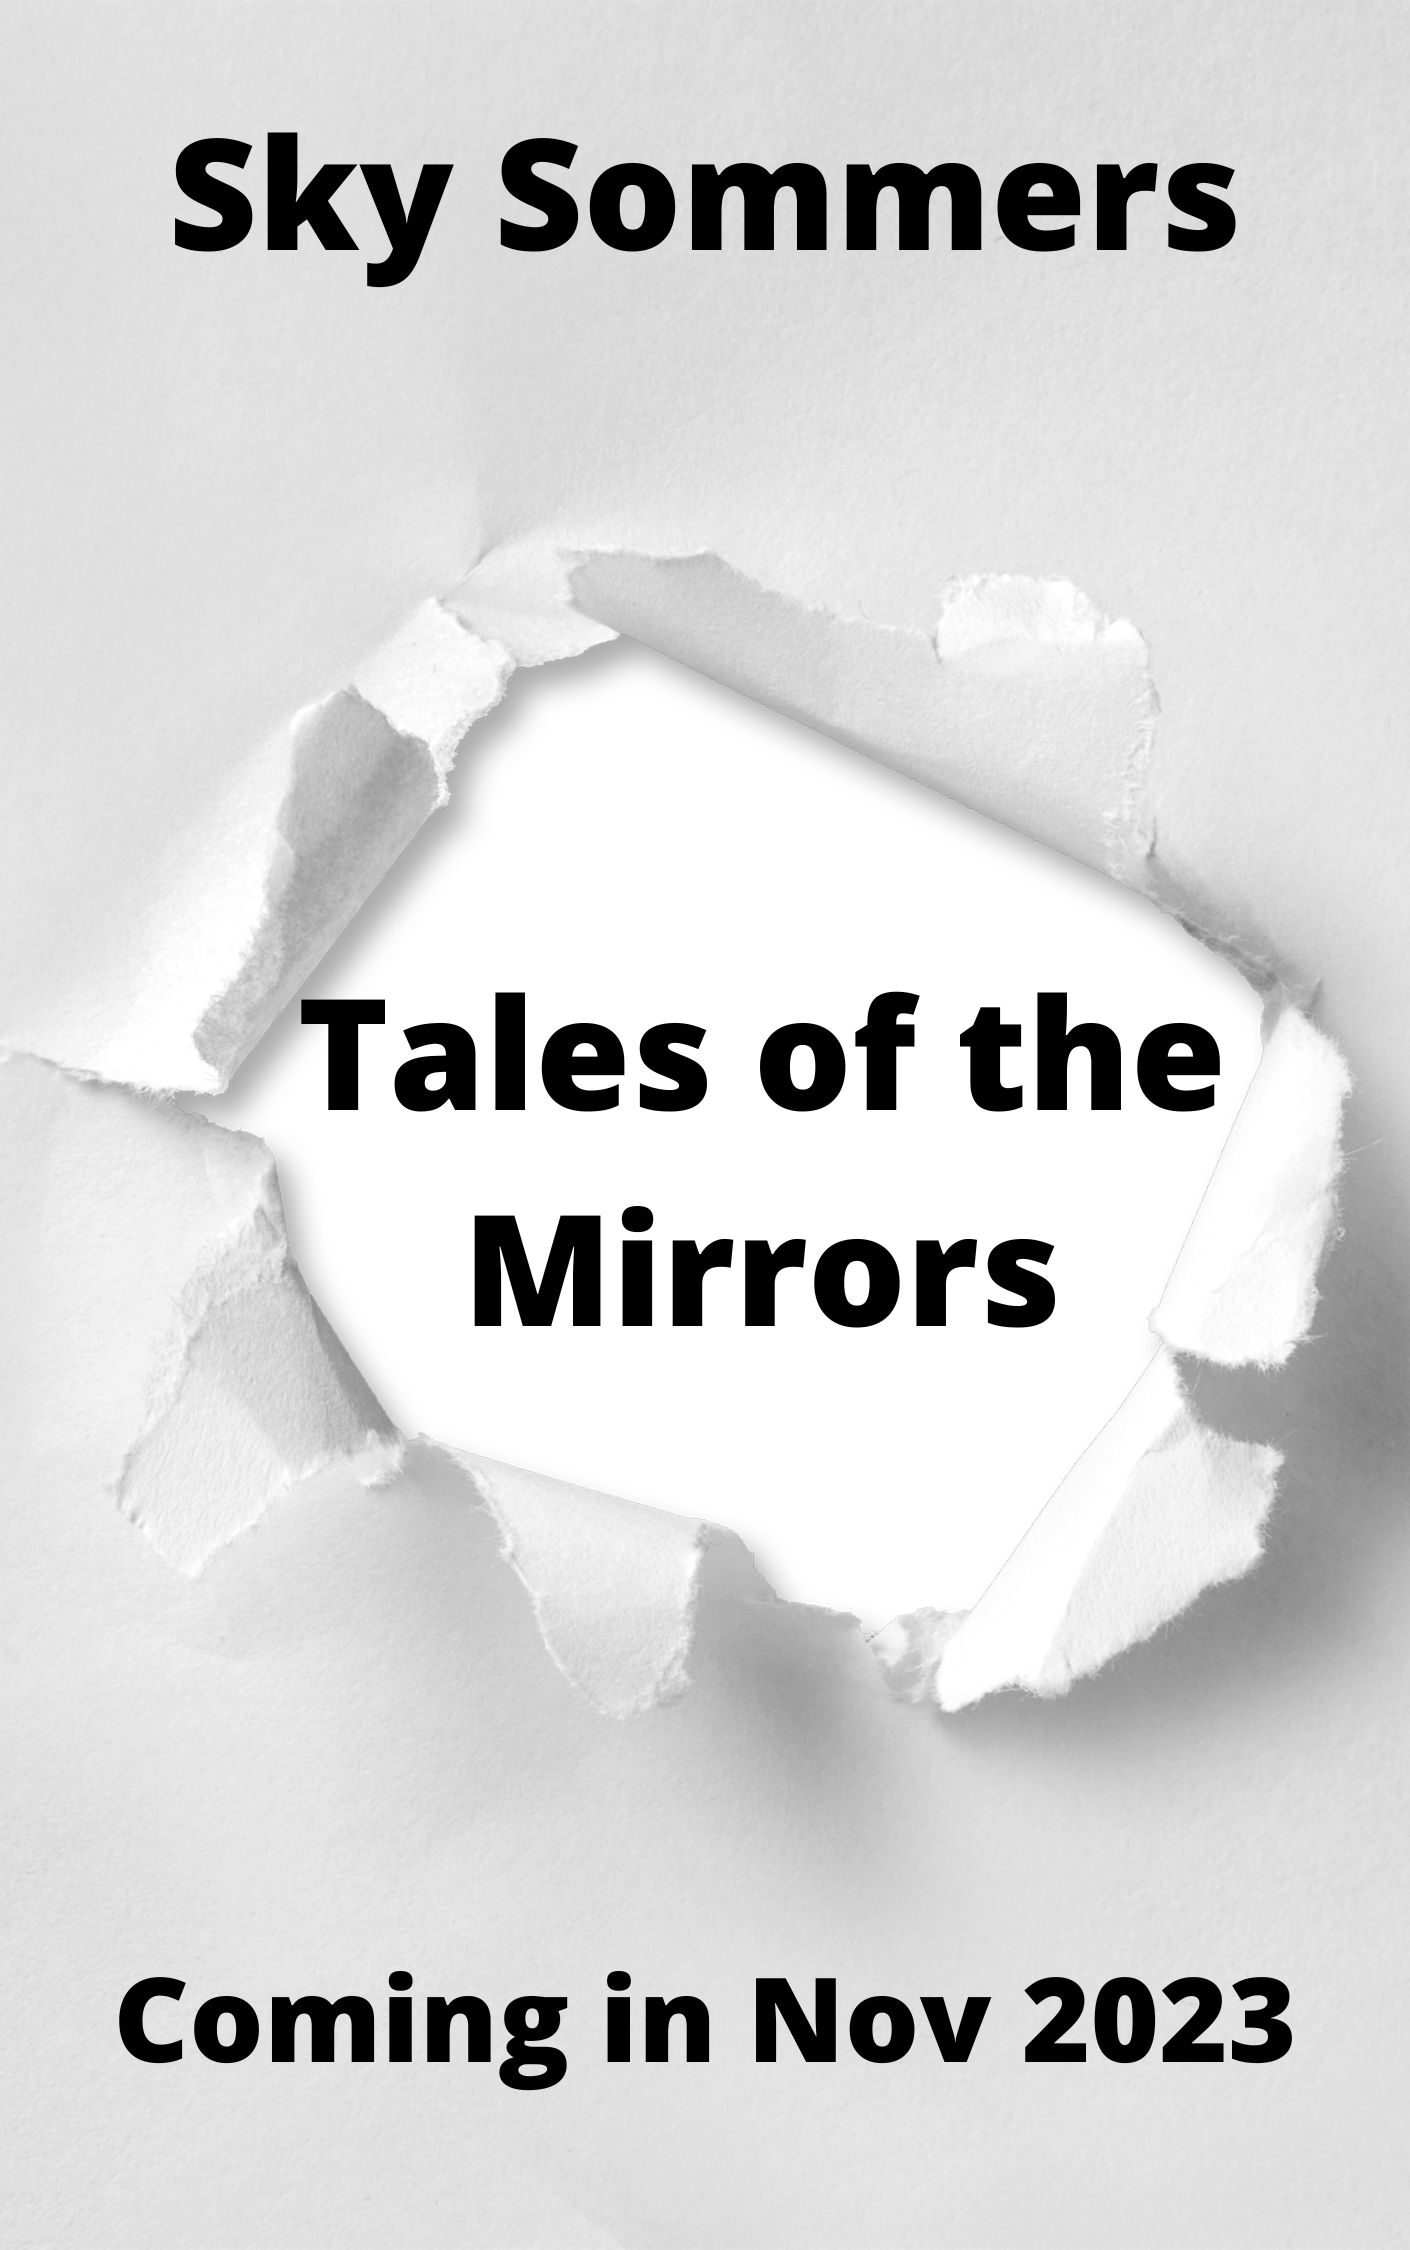 //skysommers.mediator.ee/wp-content/uploads/2023/09/Tales-of-mirrors-temp-cover.jpg